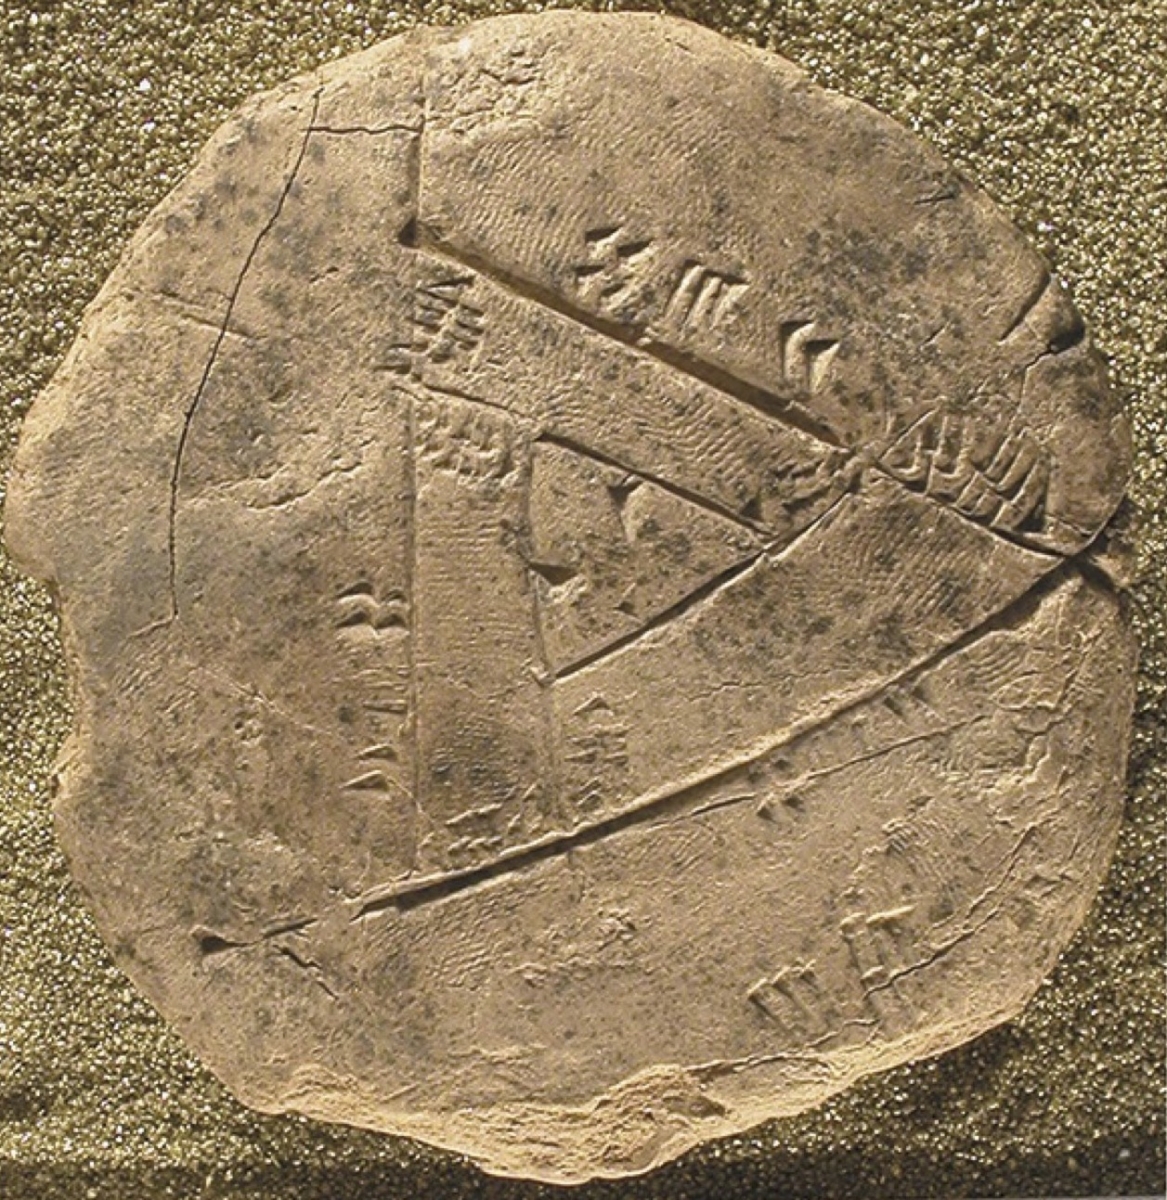 Cuneiform tablet showing one equilateral triangle inscribed within another.